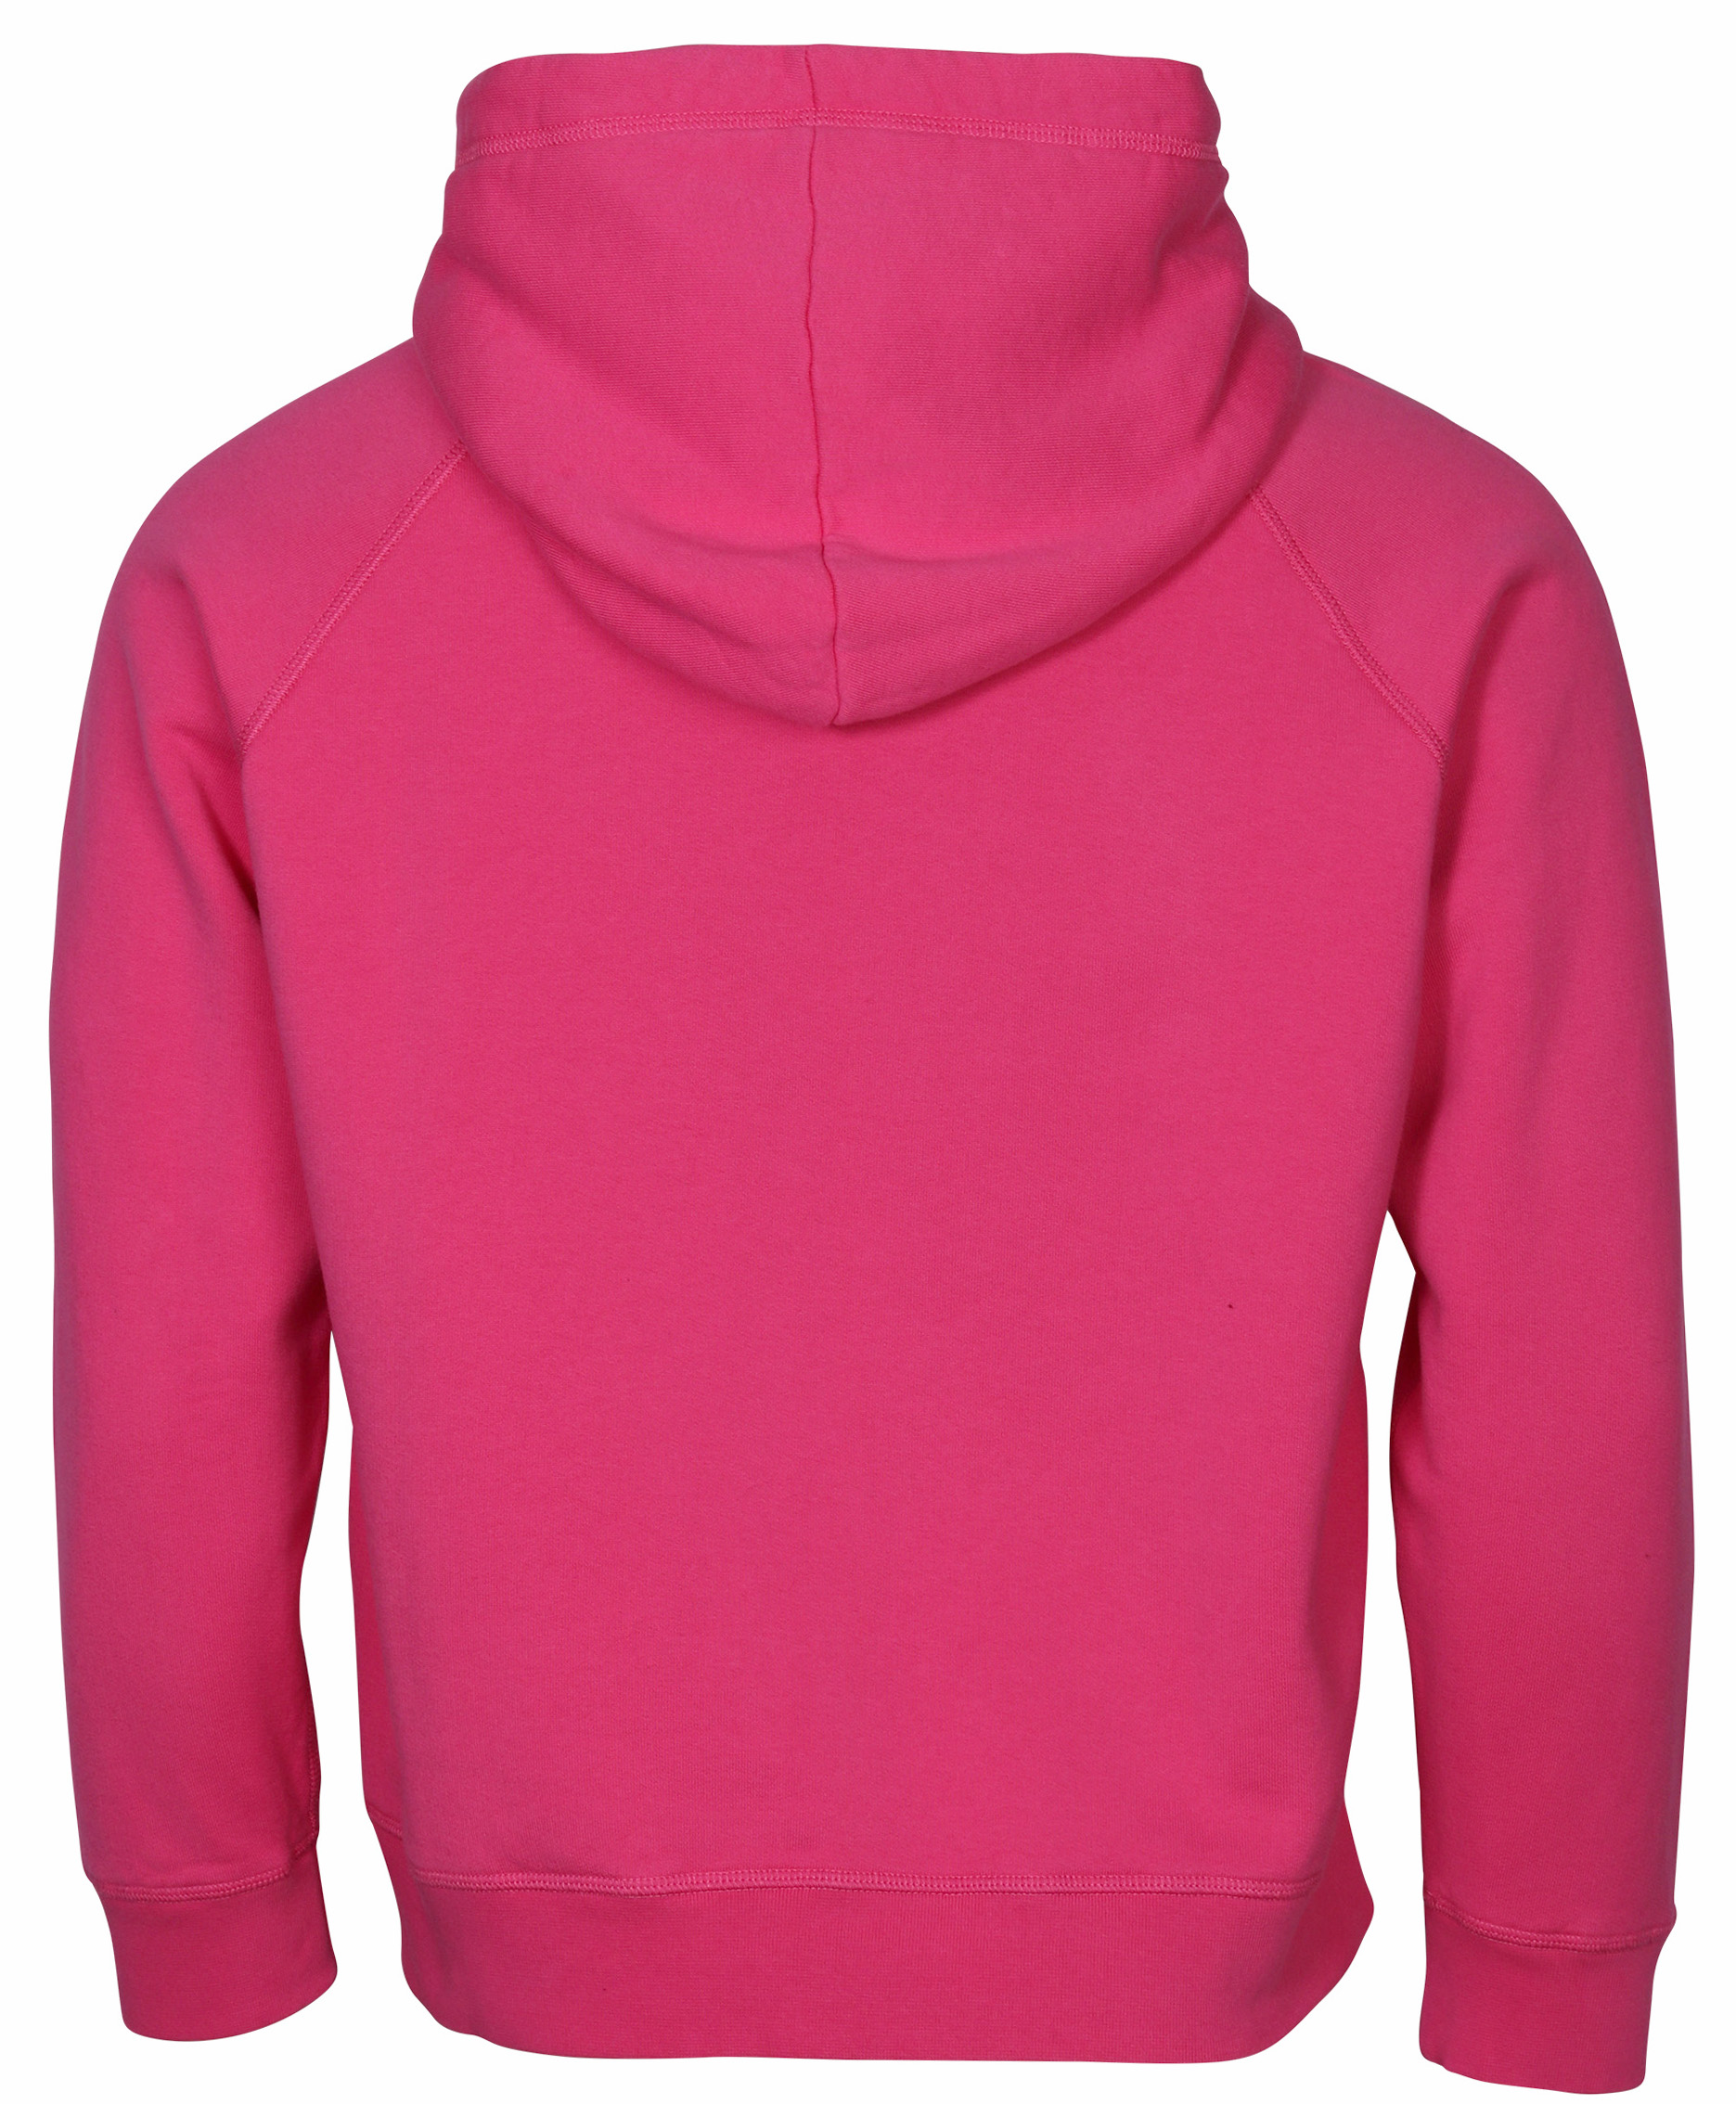 Unisex Dsquared Icon Hoodie Pink XS